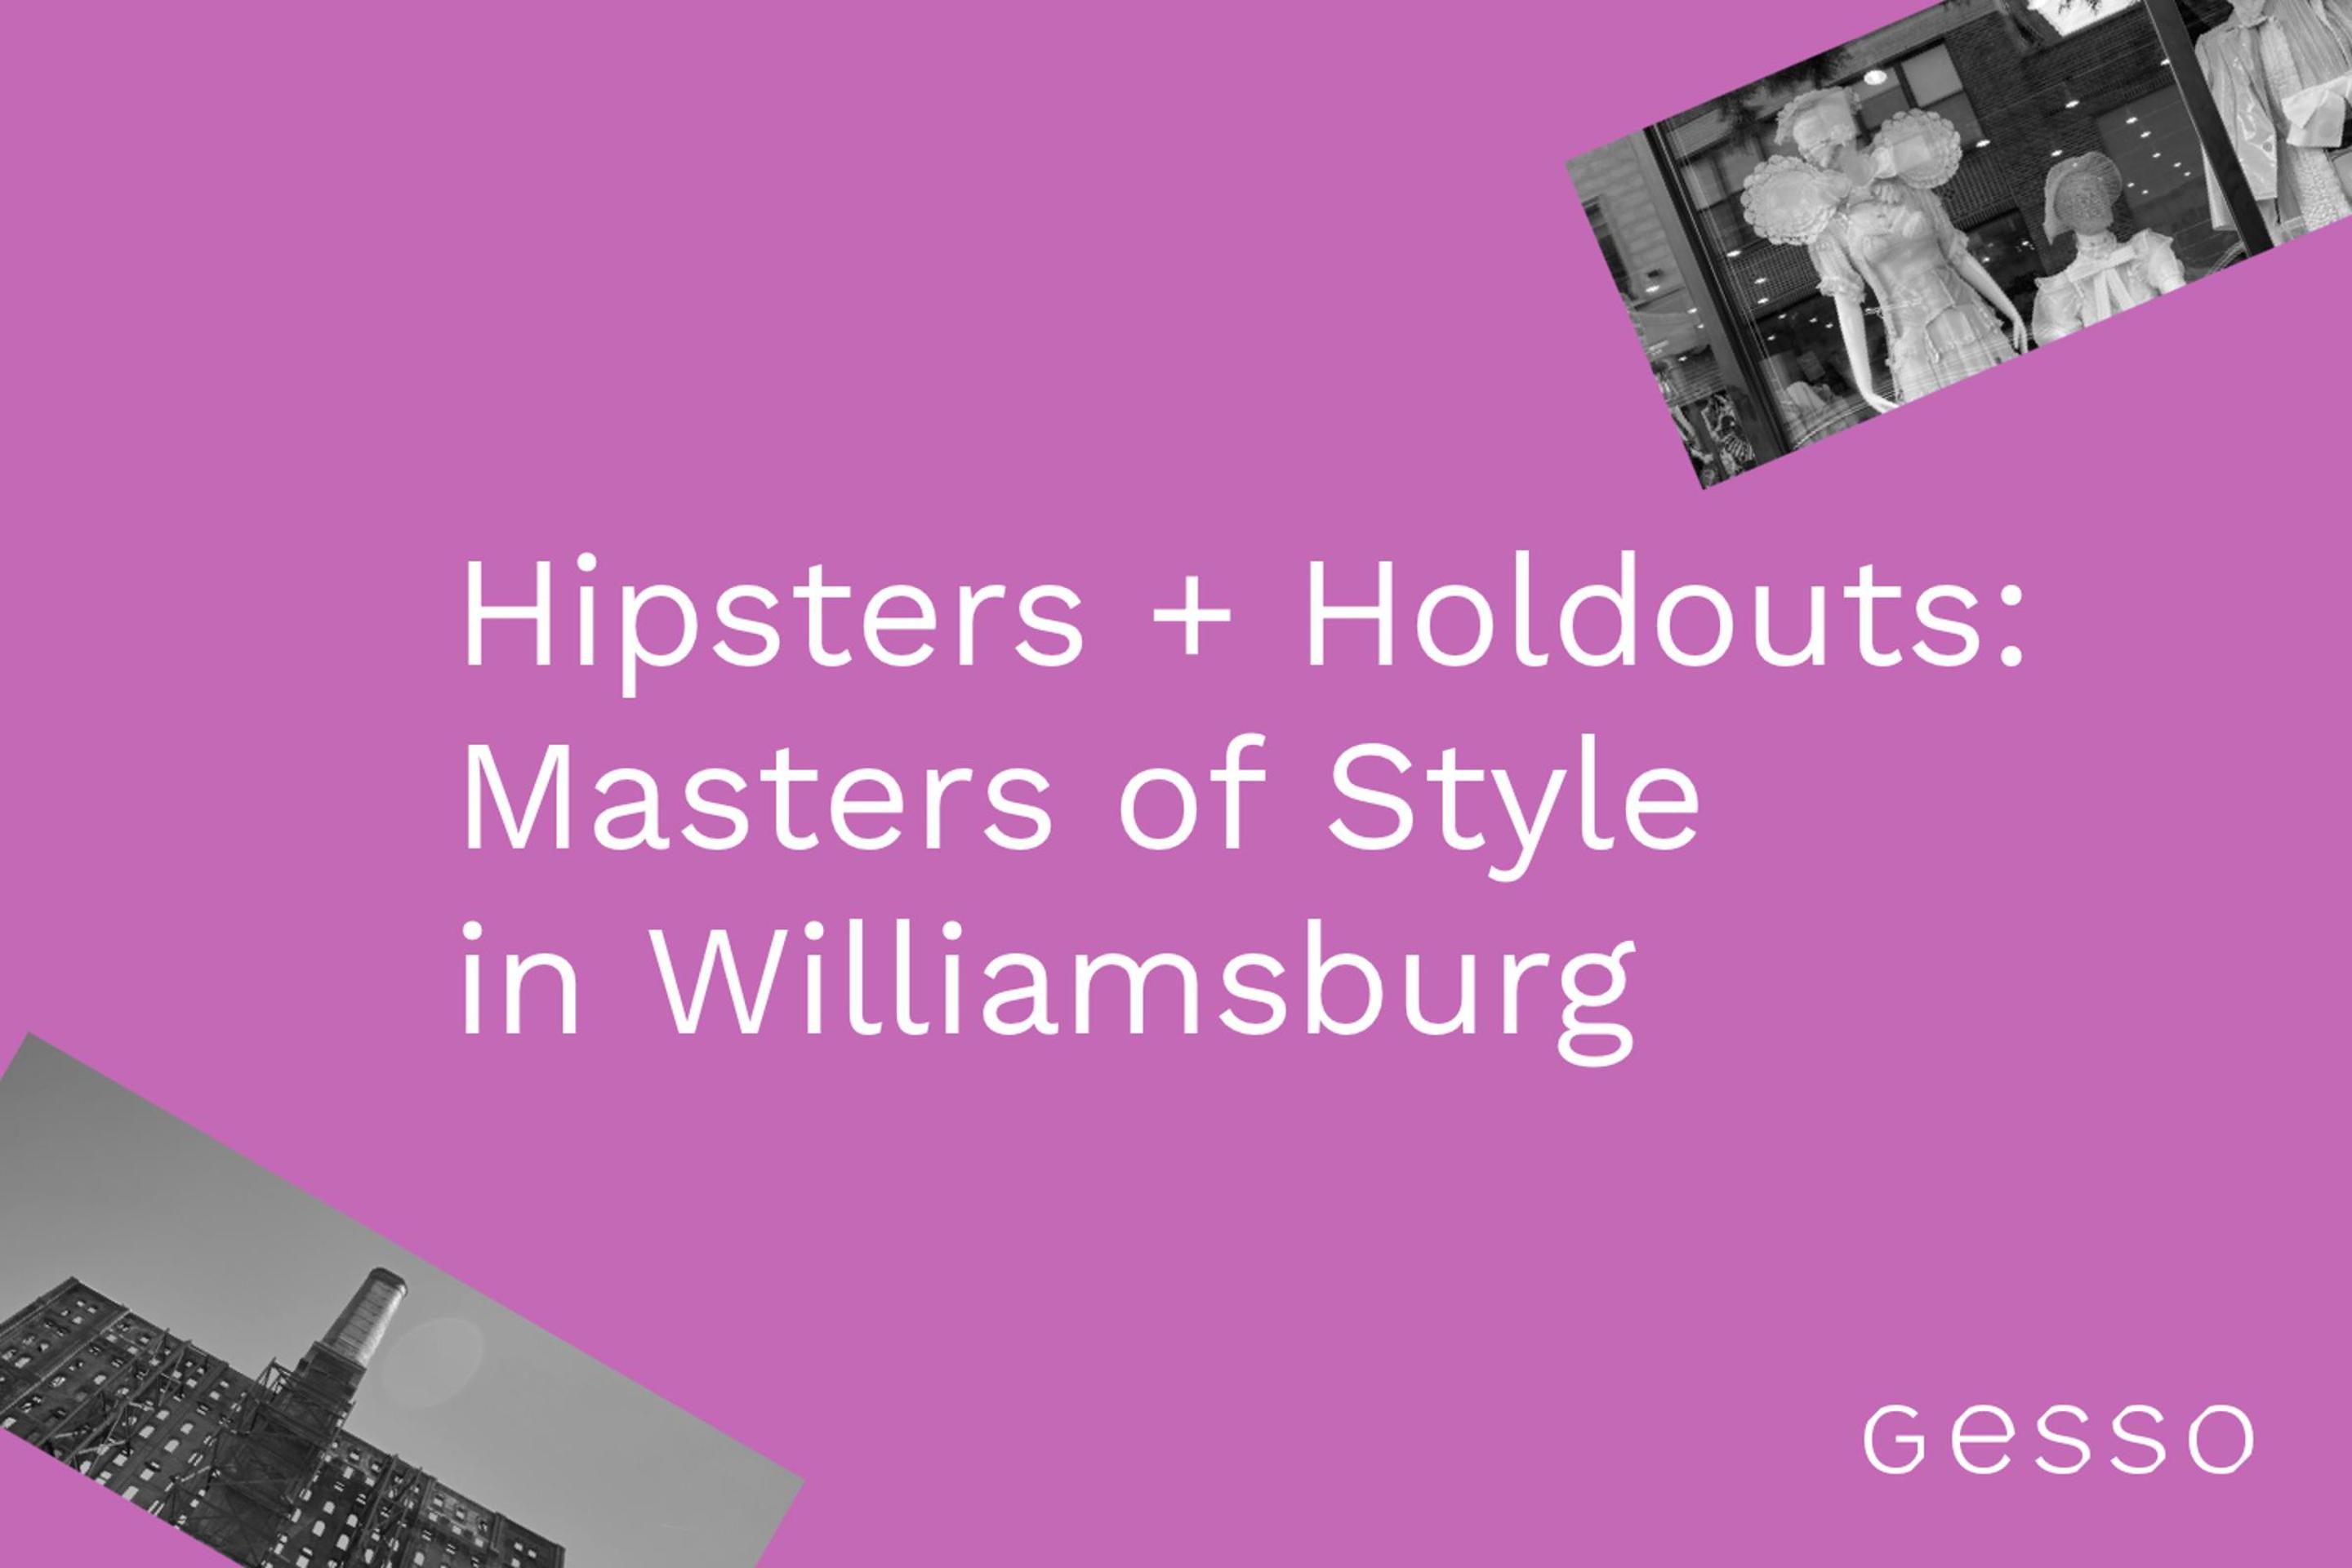 Late one night during Covid, we started wondering “Did Williamsburg invent the hipster?”

Turns out the answer is no. In fact, probably closer to the opposite. The first hipsters were fashionable non-conformists and creative countercultural types. But, what happens when a movement founded on non-conformity becomes something you can buy off the rack? 

Join us on a sociological dive into this subculture. We’ll find all of the markers of hipsterism, from thrifting and vinyls, to beer and bowling, and even (vegan) ice cream.

This walk was created in Summer 2020.